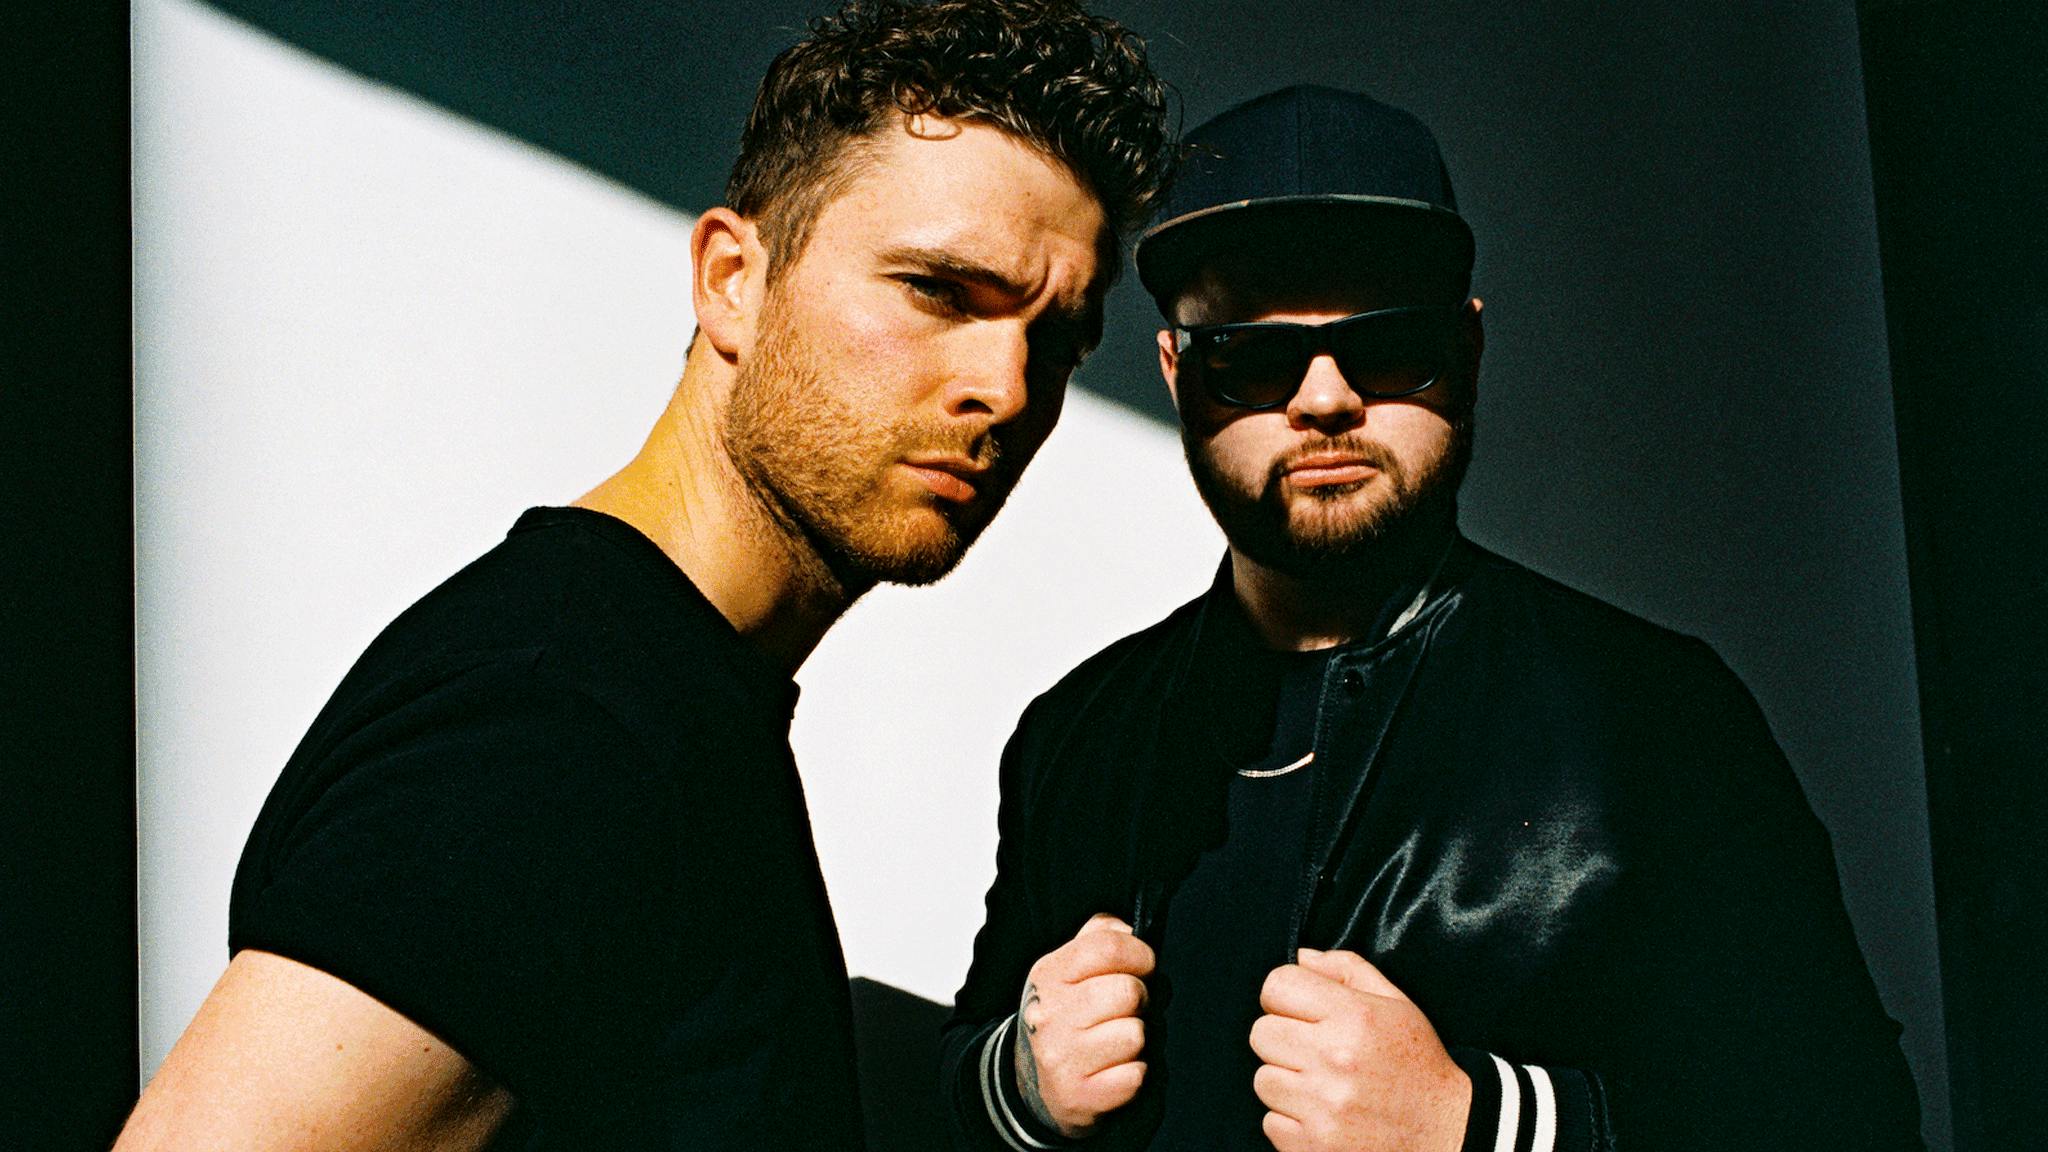 “Merry Riffmas”: Royal Blood officially release B-side, Supermodel Avalanches